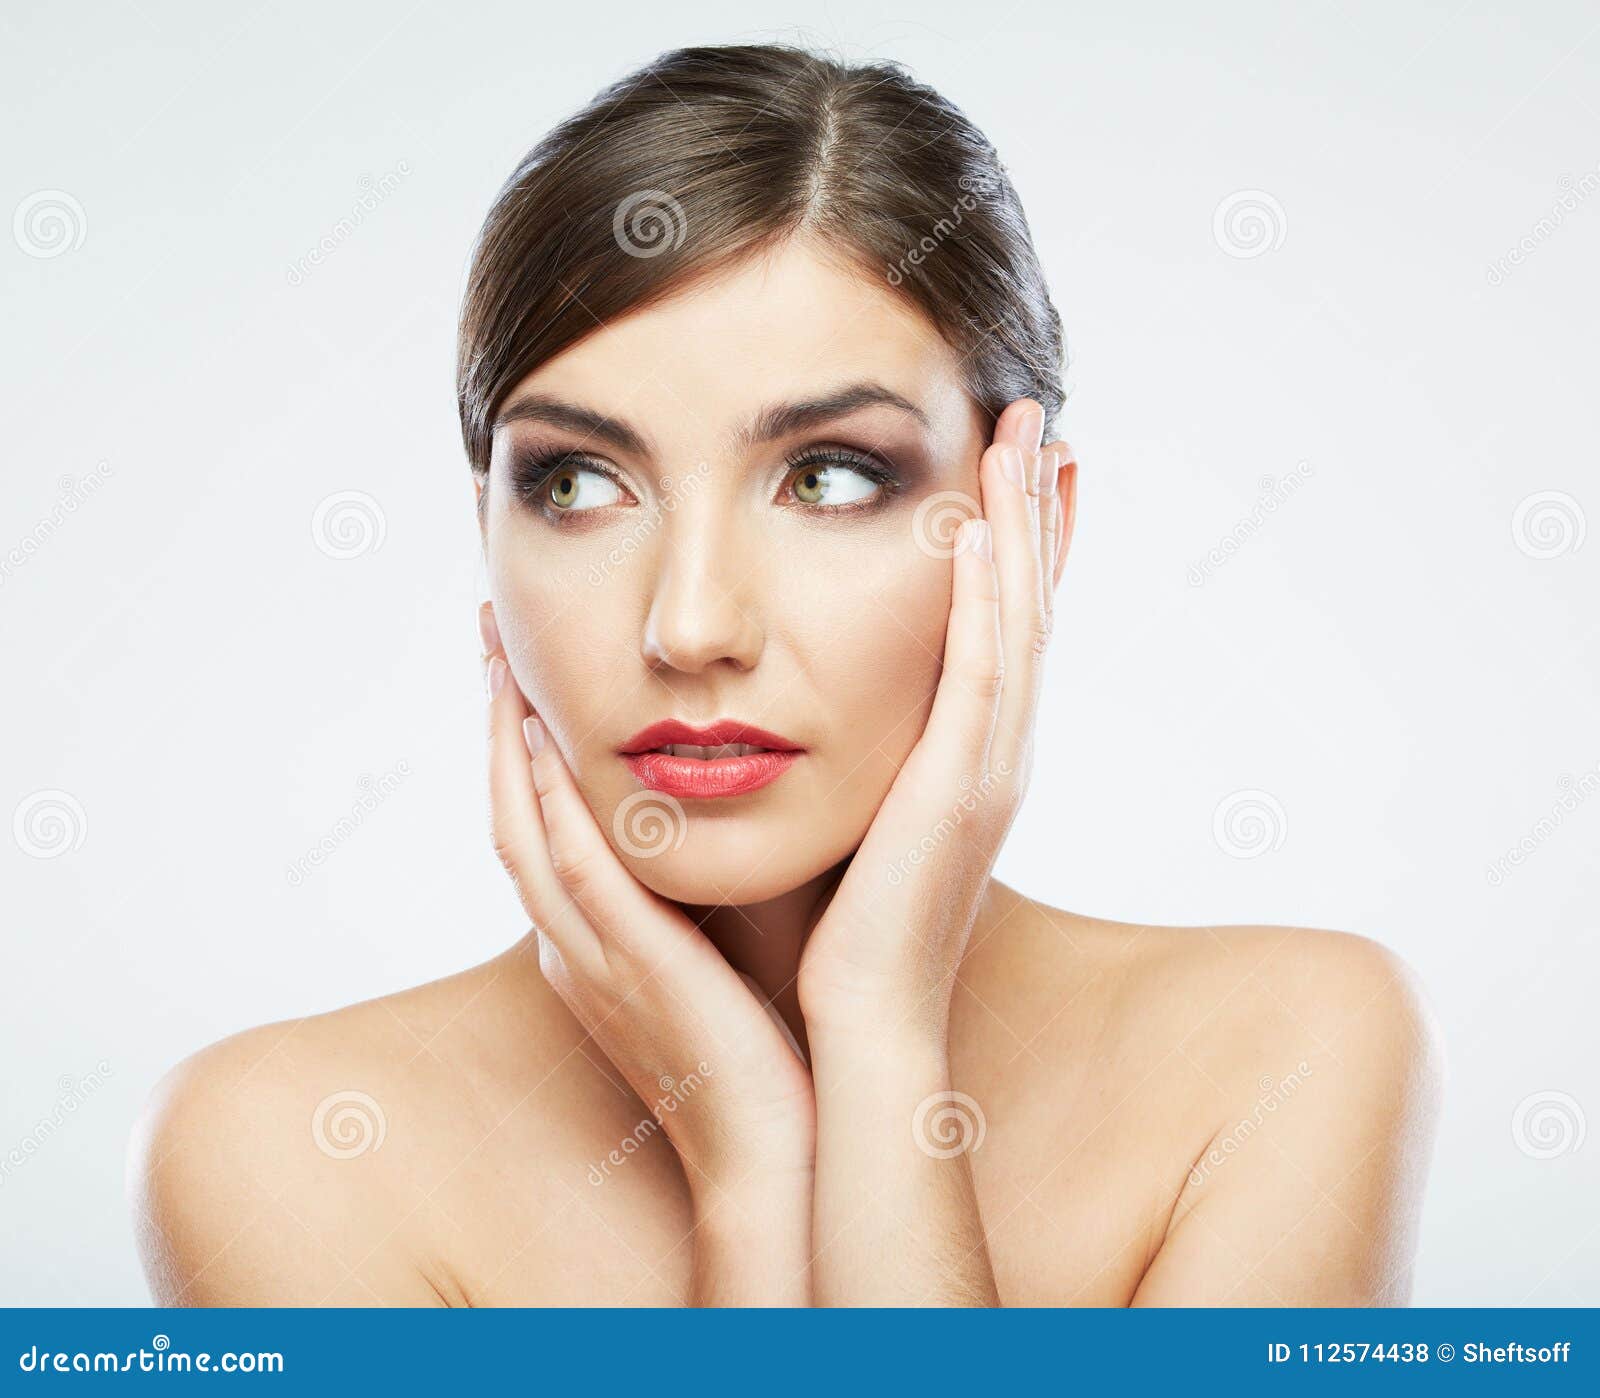 Woman face close up portrait. Young female model poses. - SuperStock